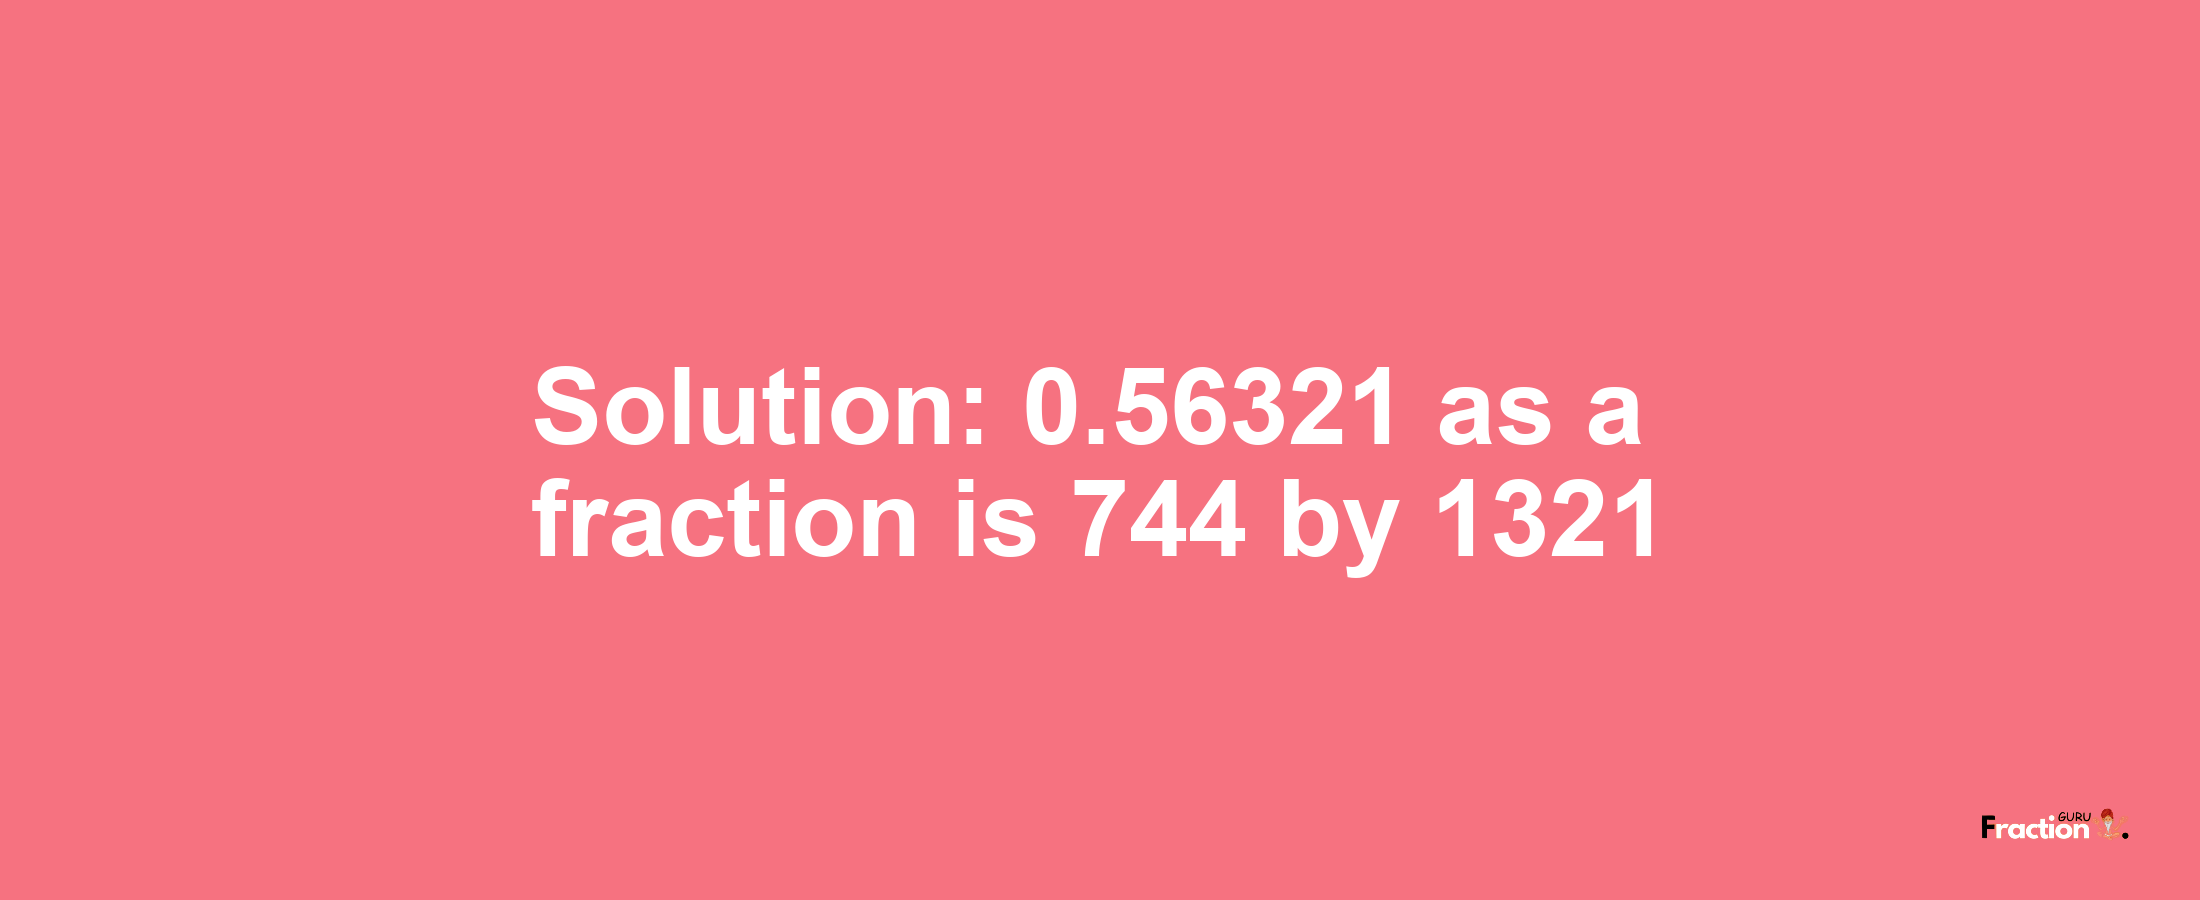 Solution:0.56321 as a fraction is 744/1321